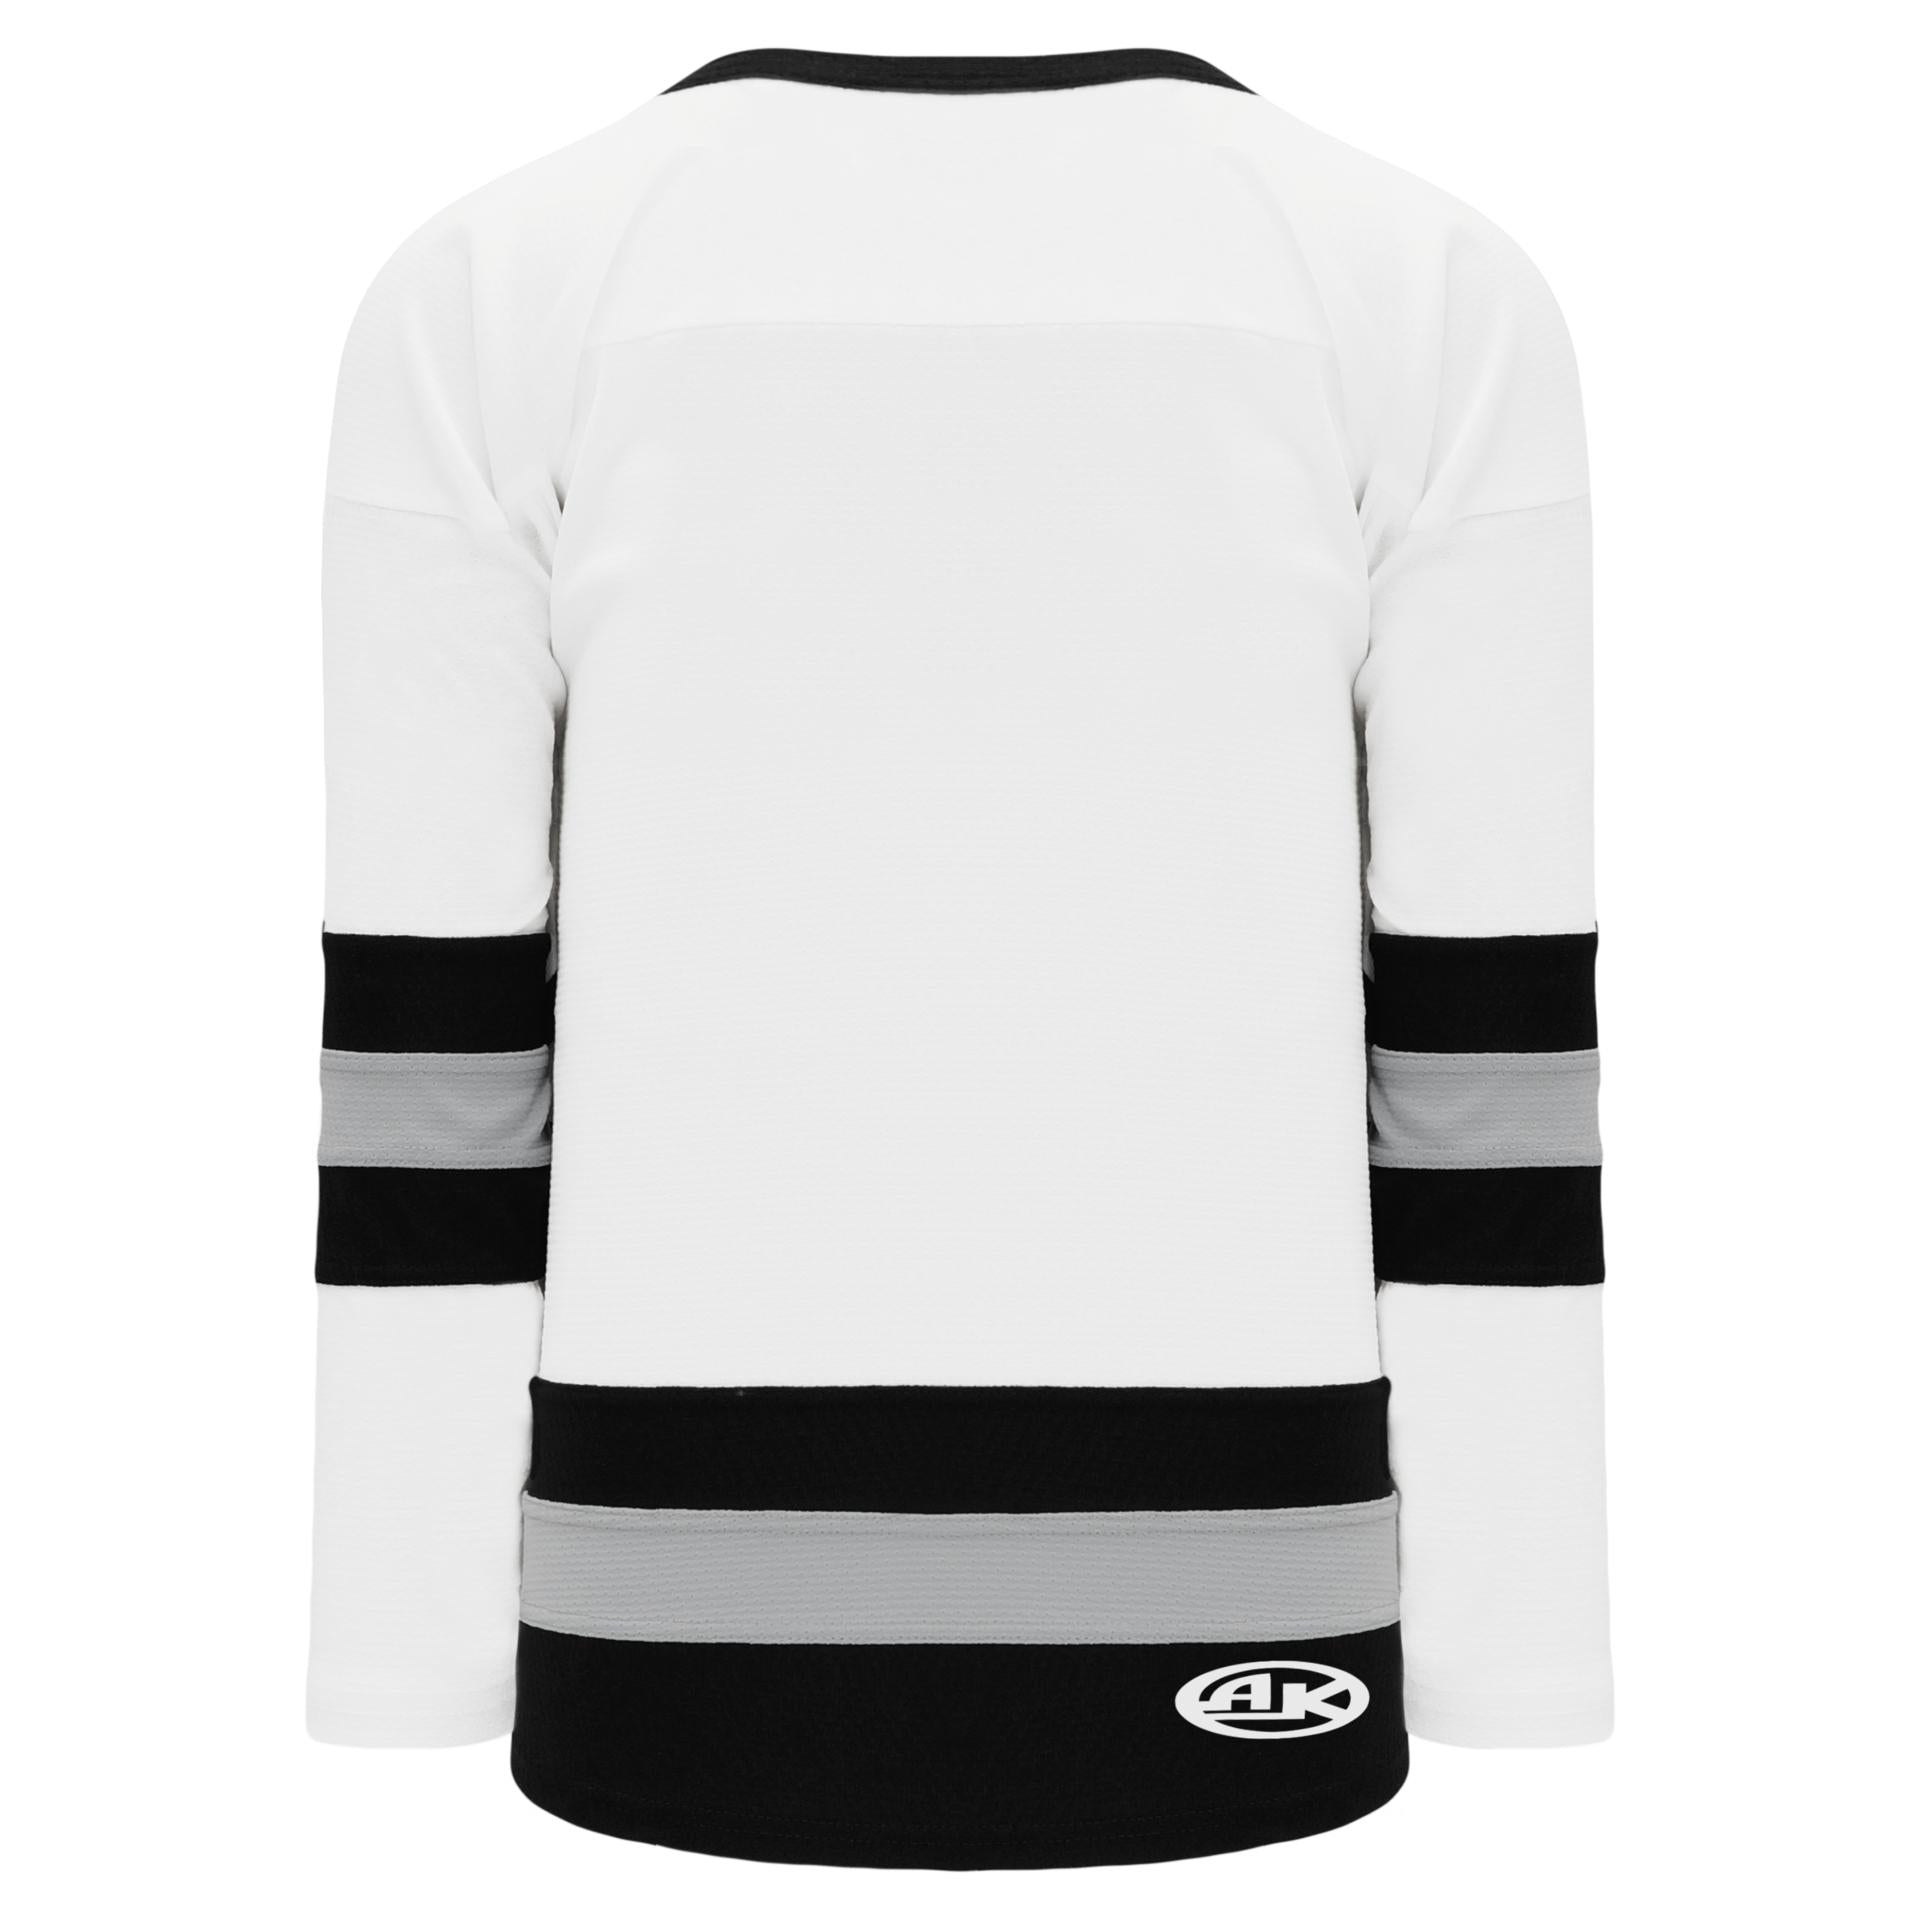 white and grey jersey